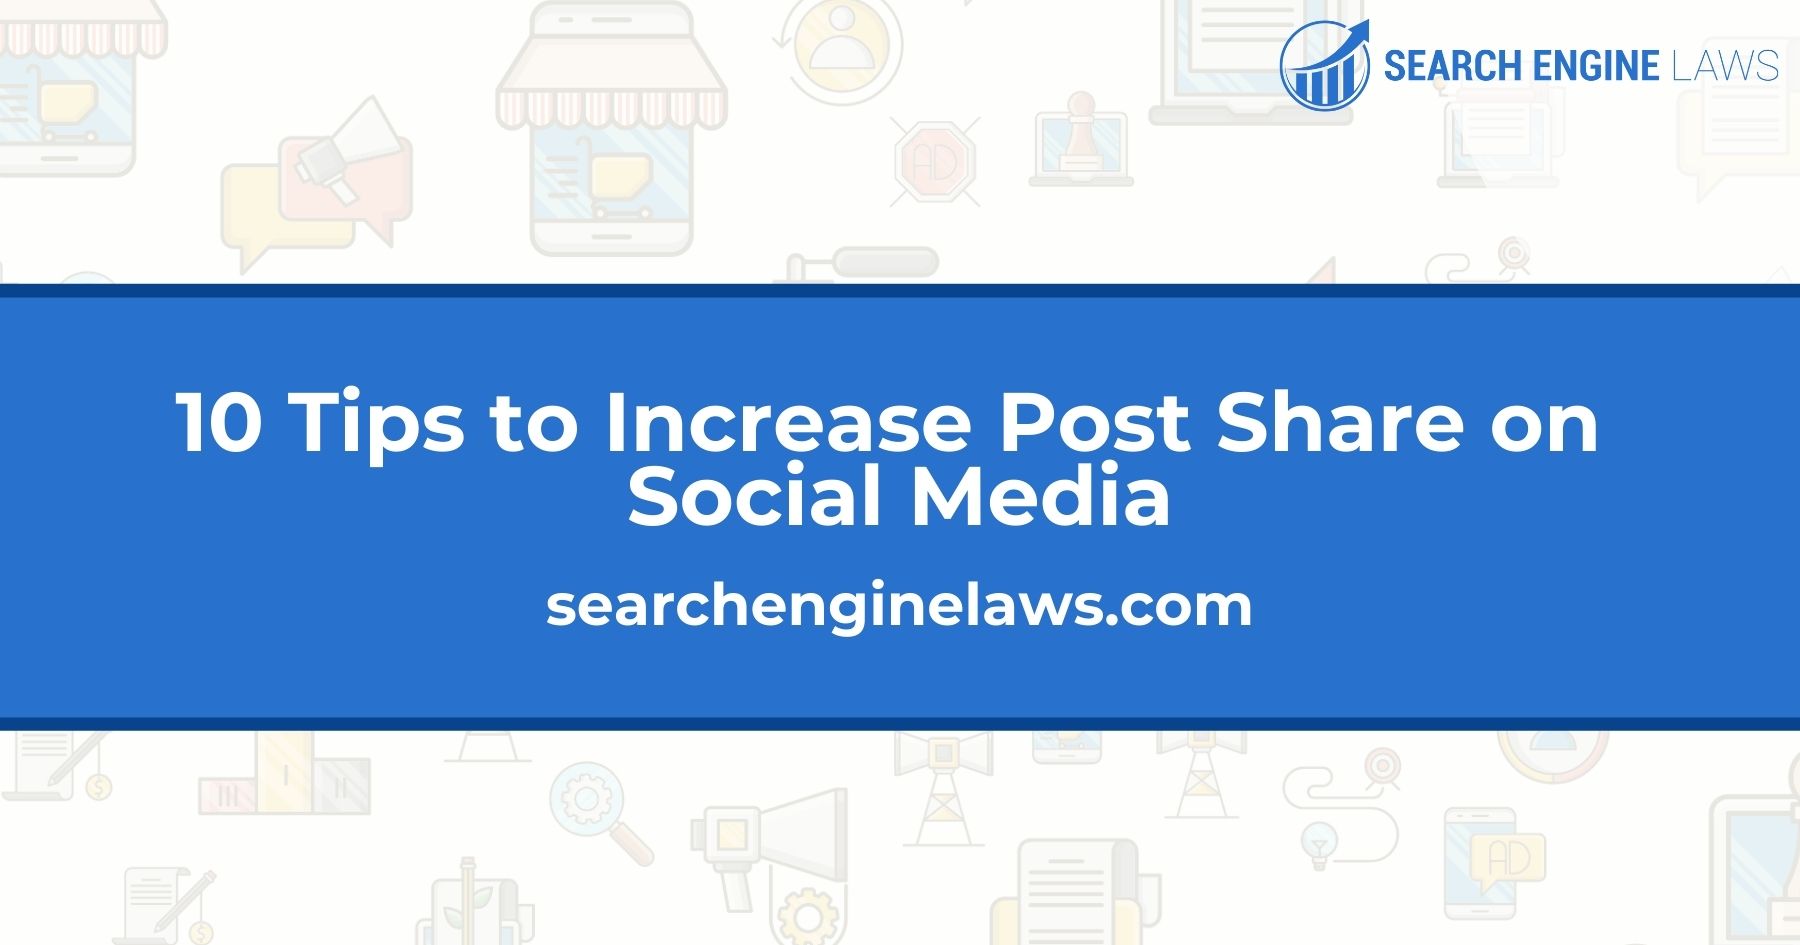 Tips to Increase Post Share on Social Media